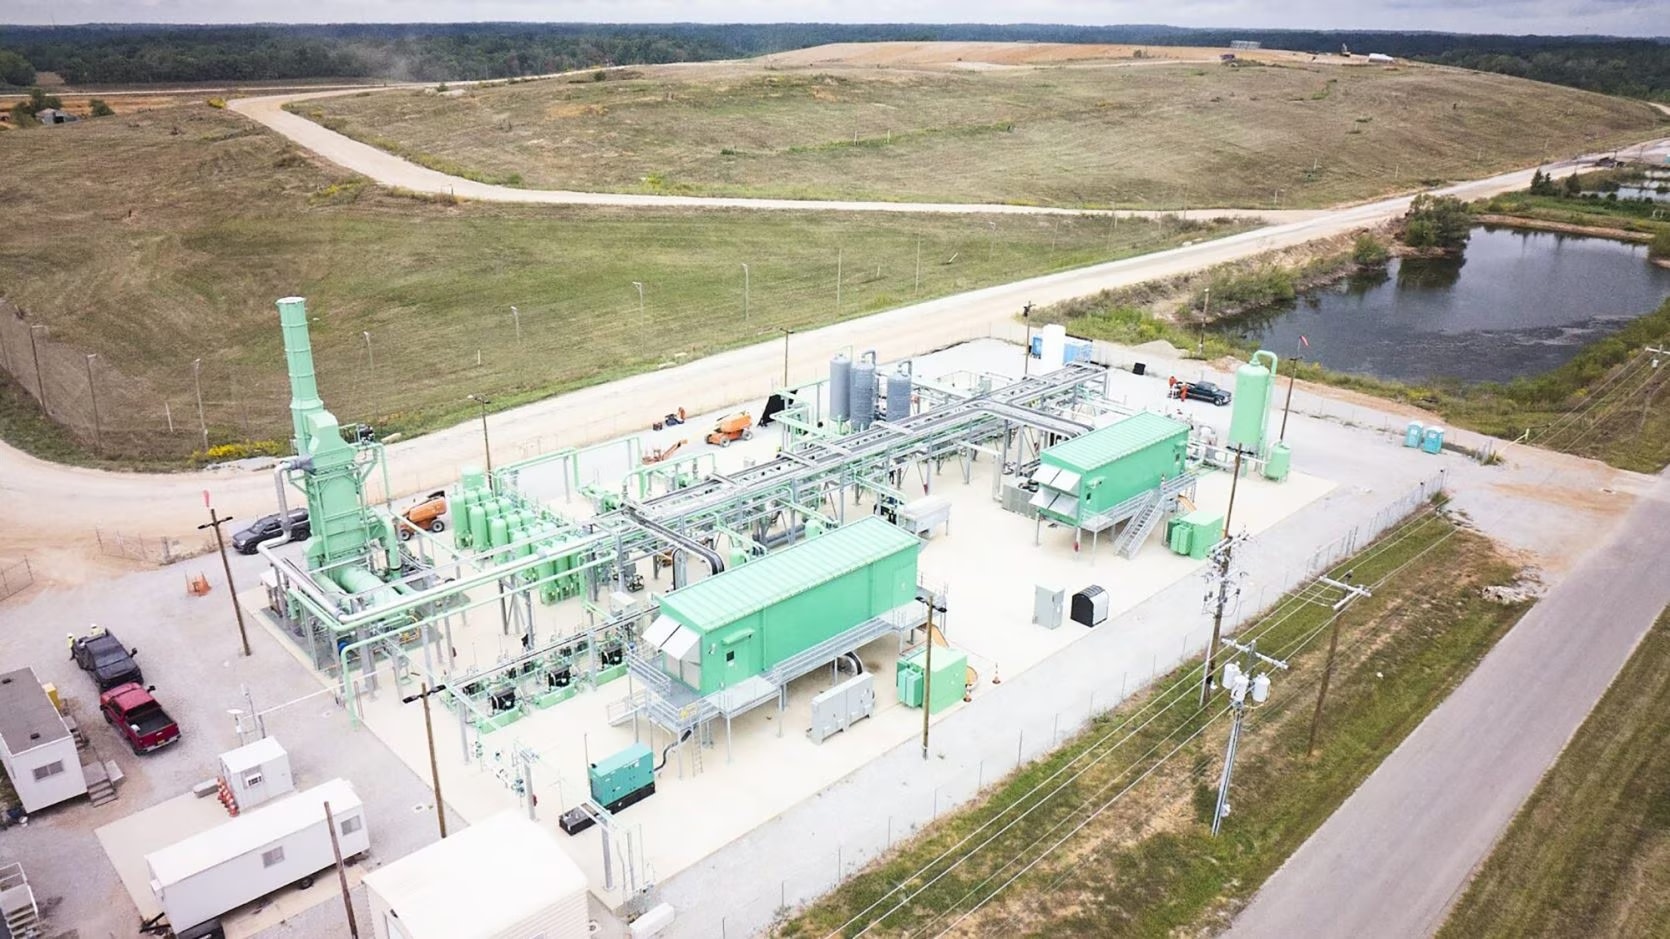 KnowESG_bp's Archaea Energy Launches First-of-a-Kind RNG Plant